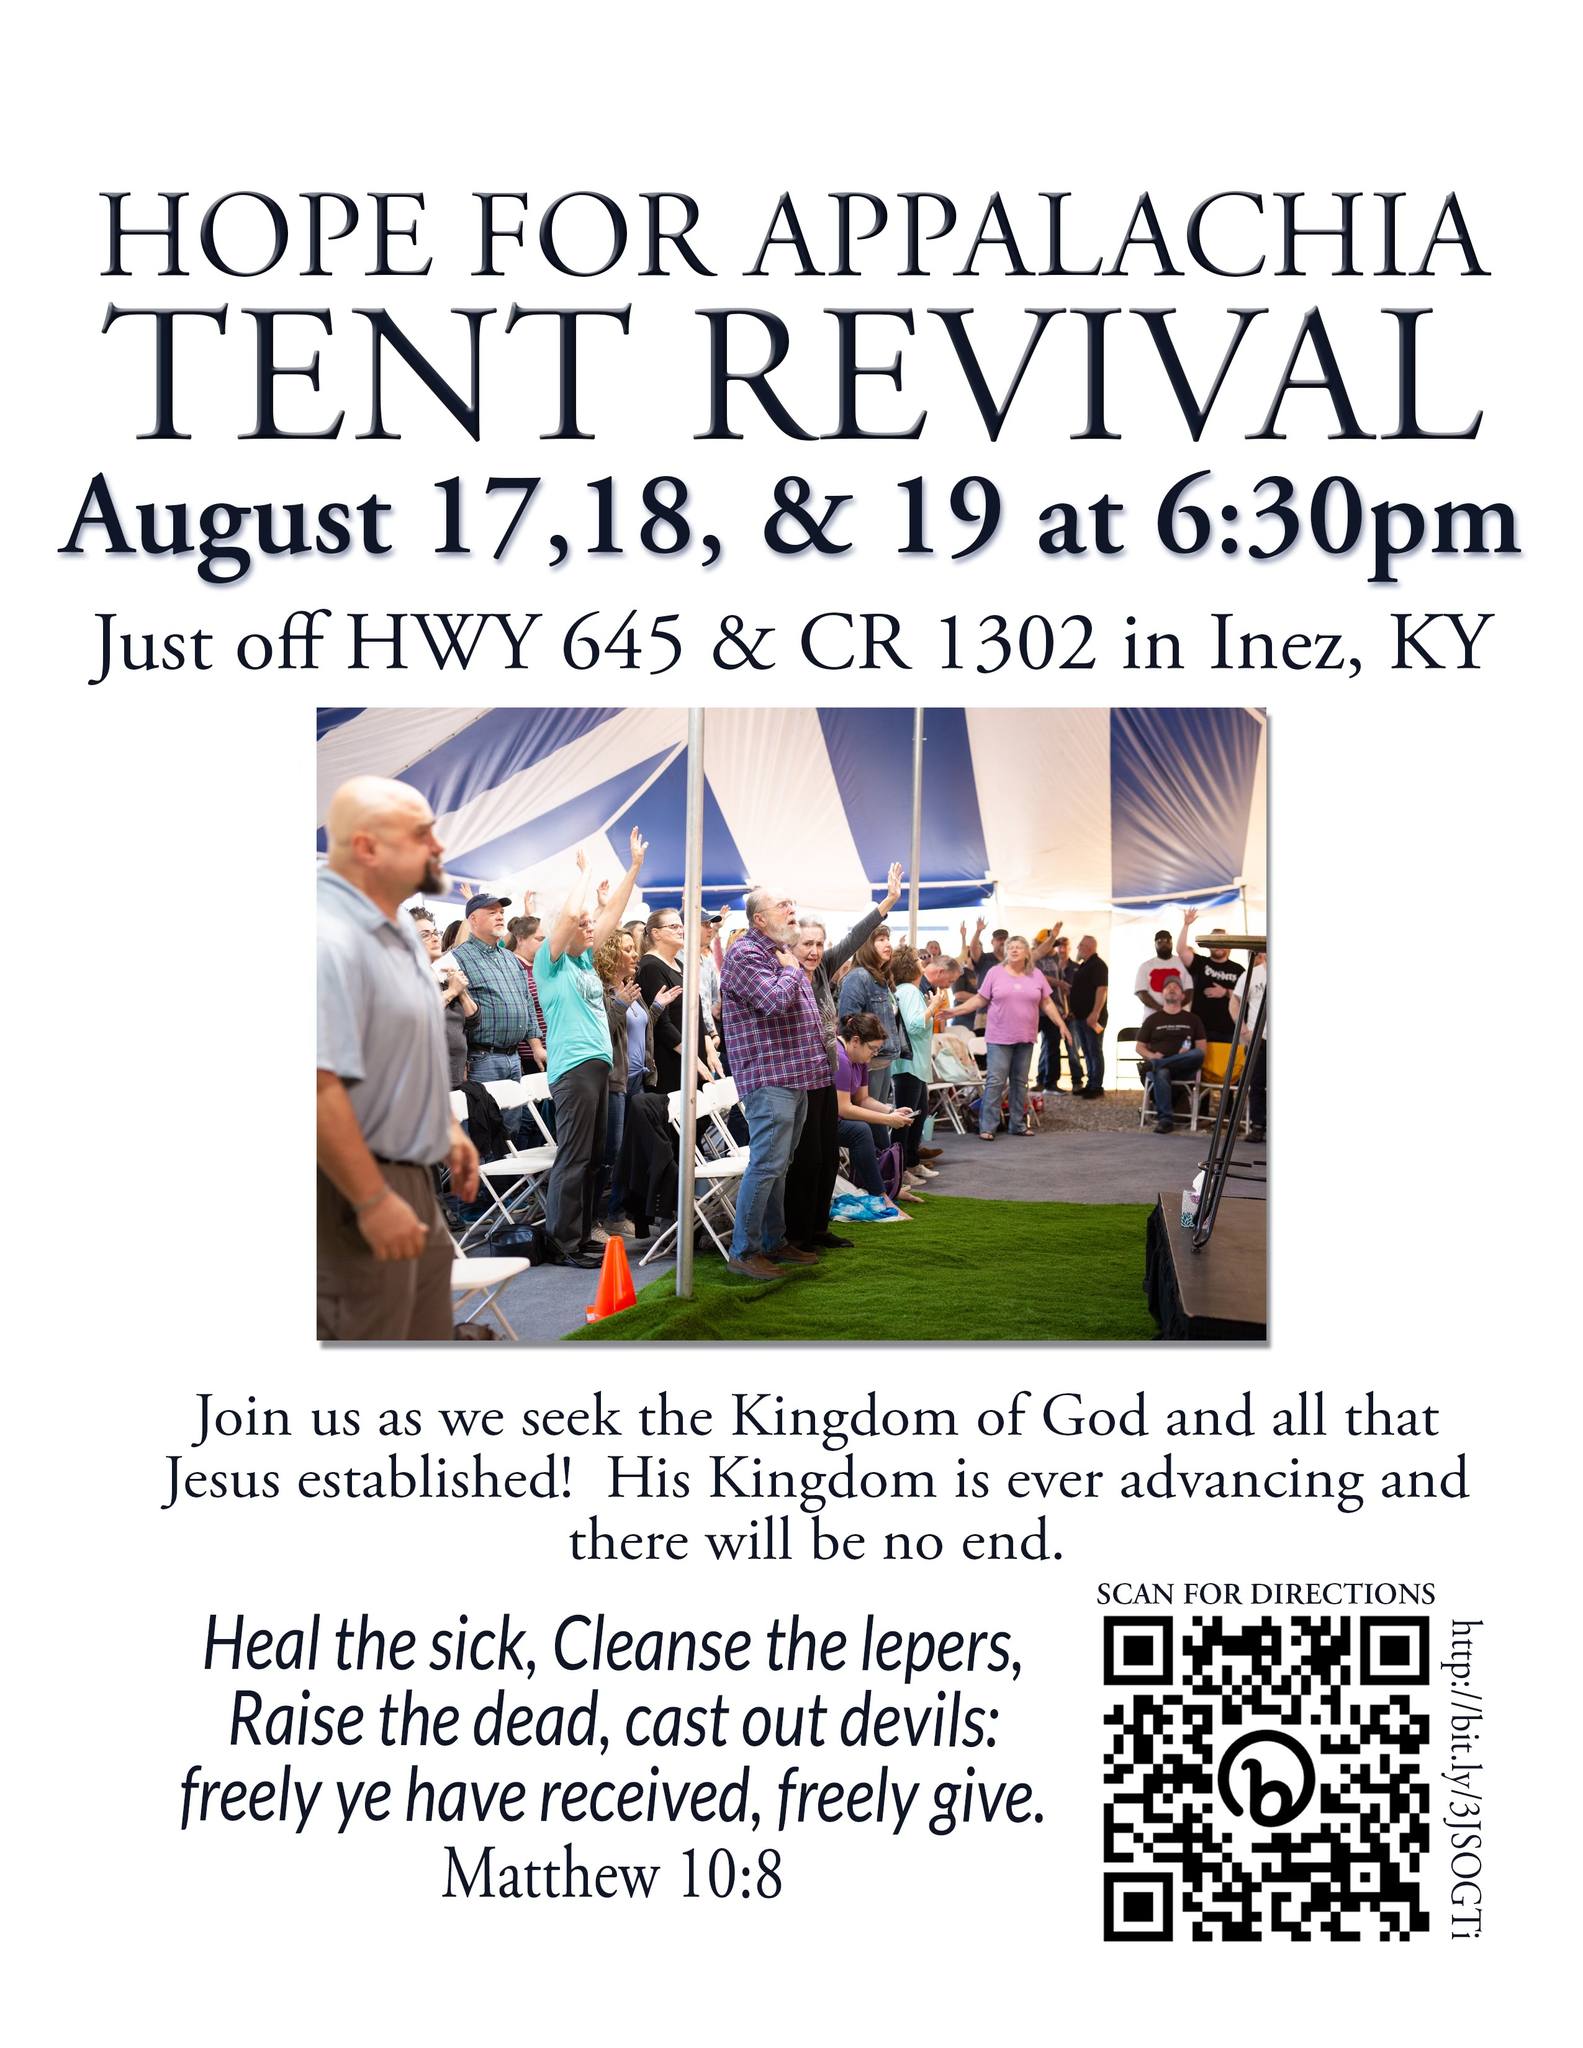 Old-time tent revival on tap for Thursday, Friday and Saturday